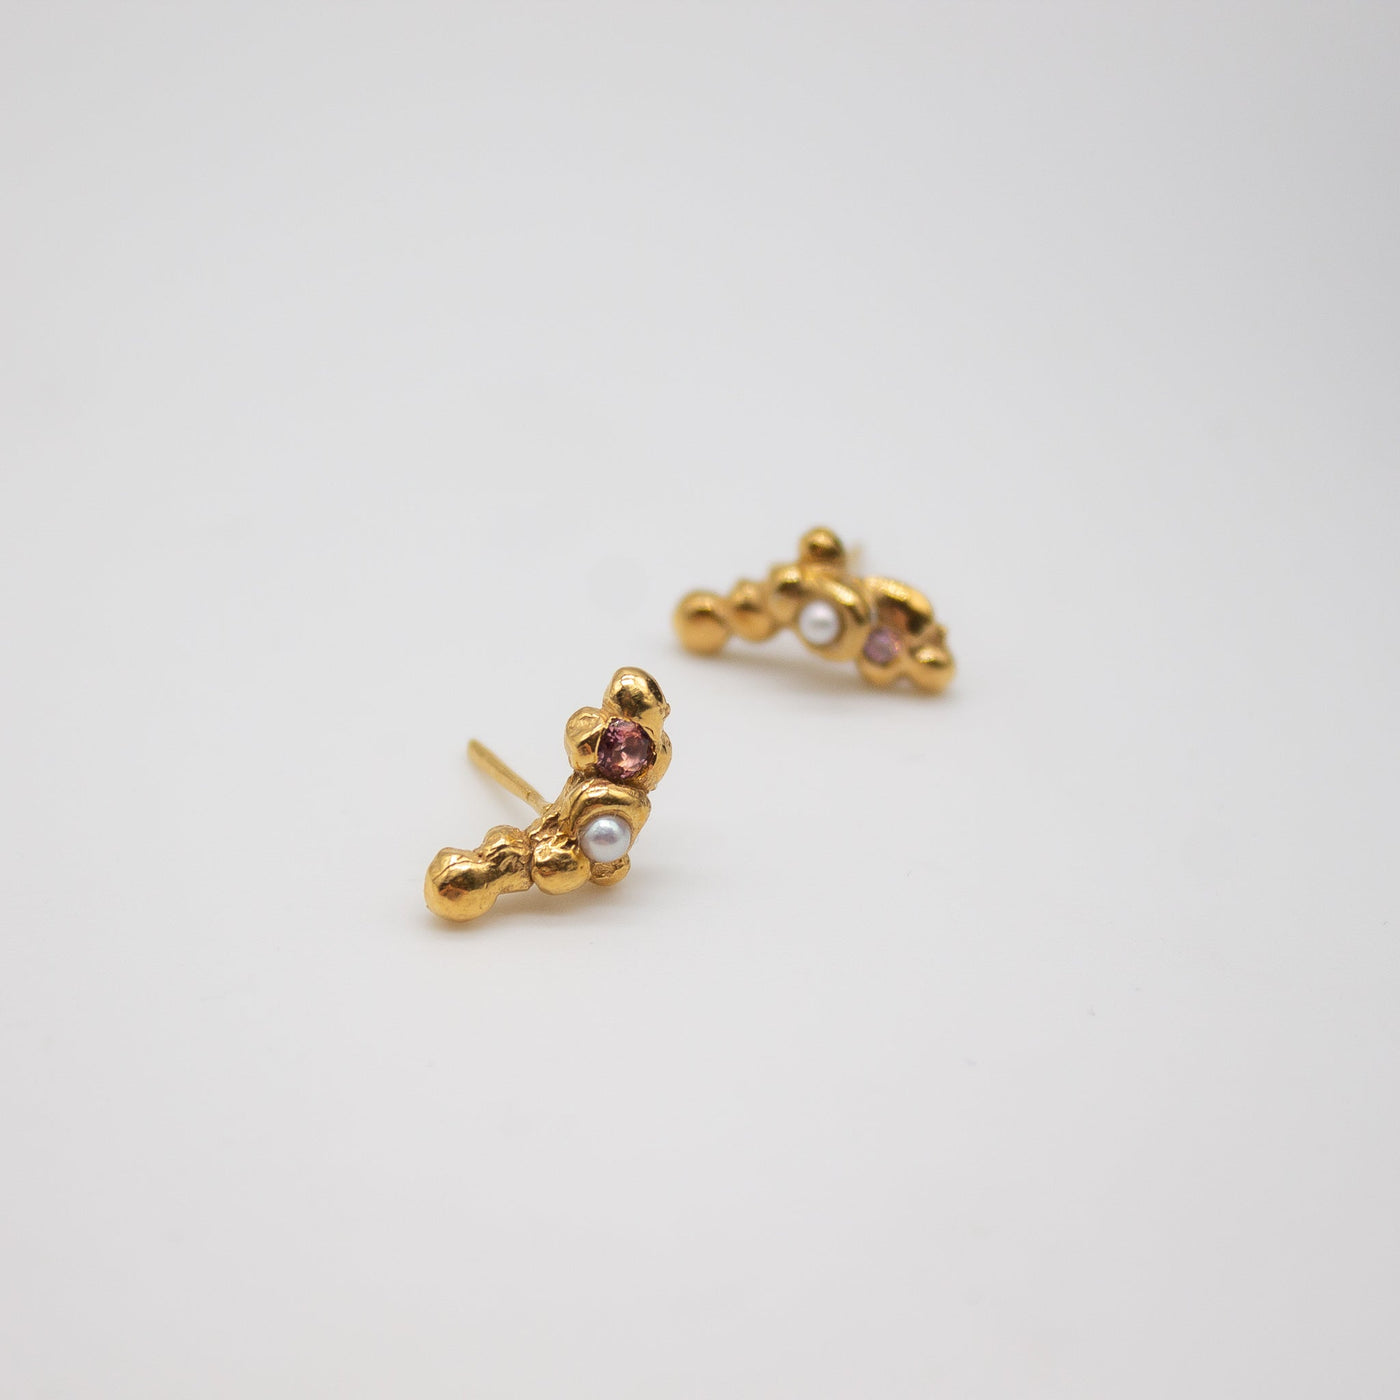 Bridal jewelery MORSKOGEN // Ear studs gold-plated with delicate tourmalines and freshwater pearls